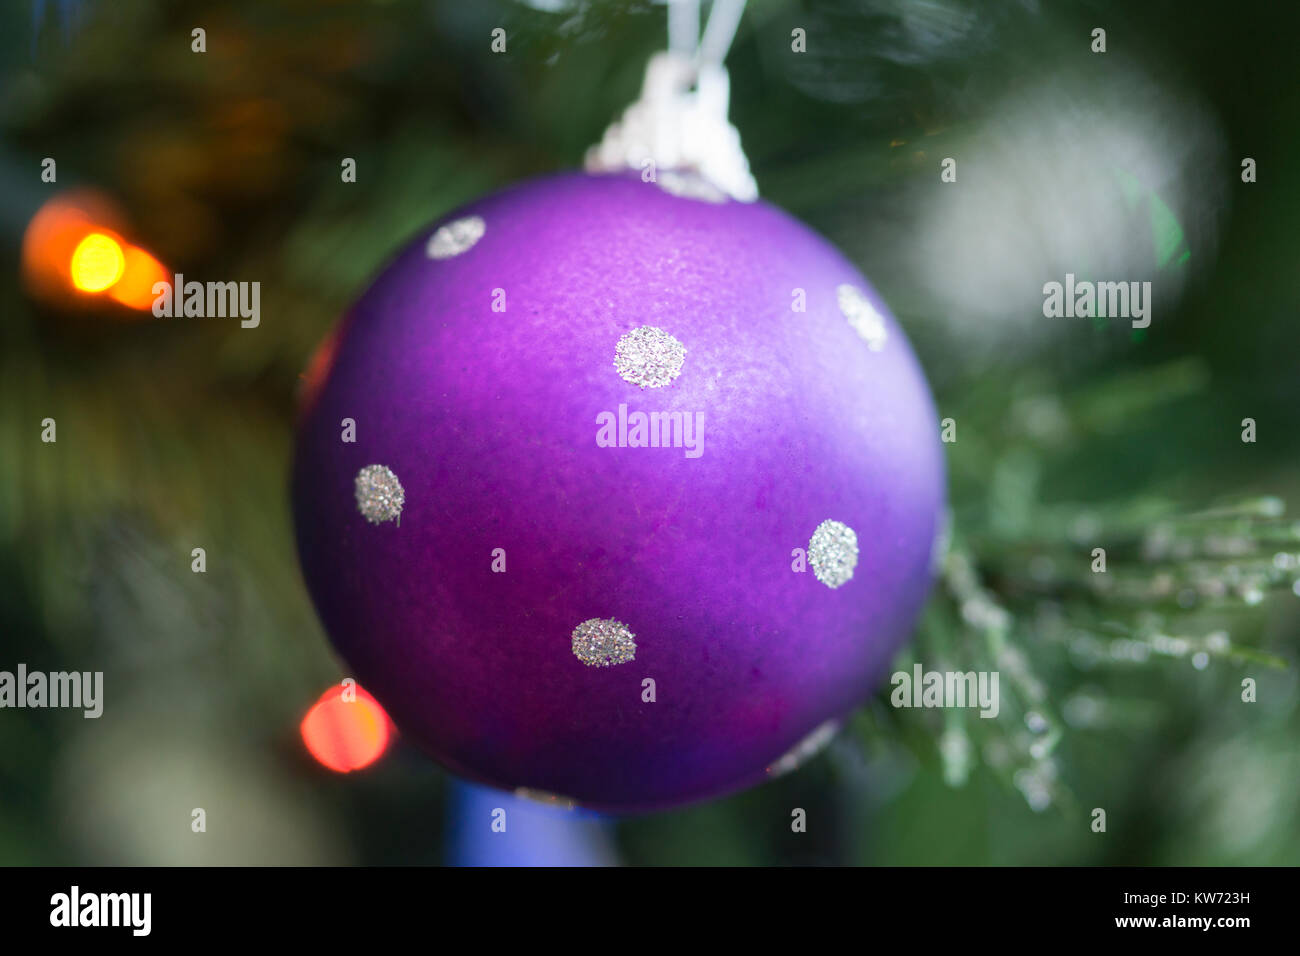 A closeup of a single purple bauble decoration with silver spots hanging from a Christmas tree Stock Photo